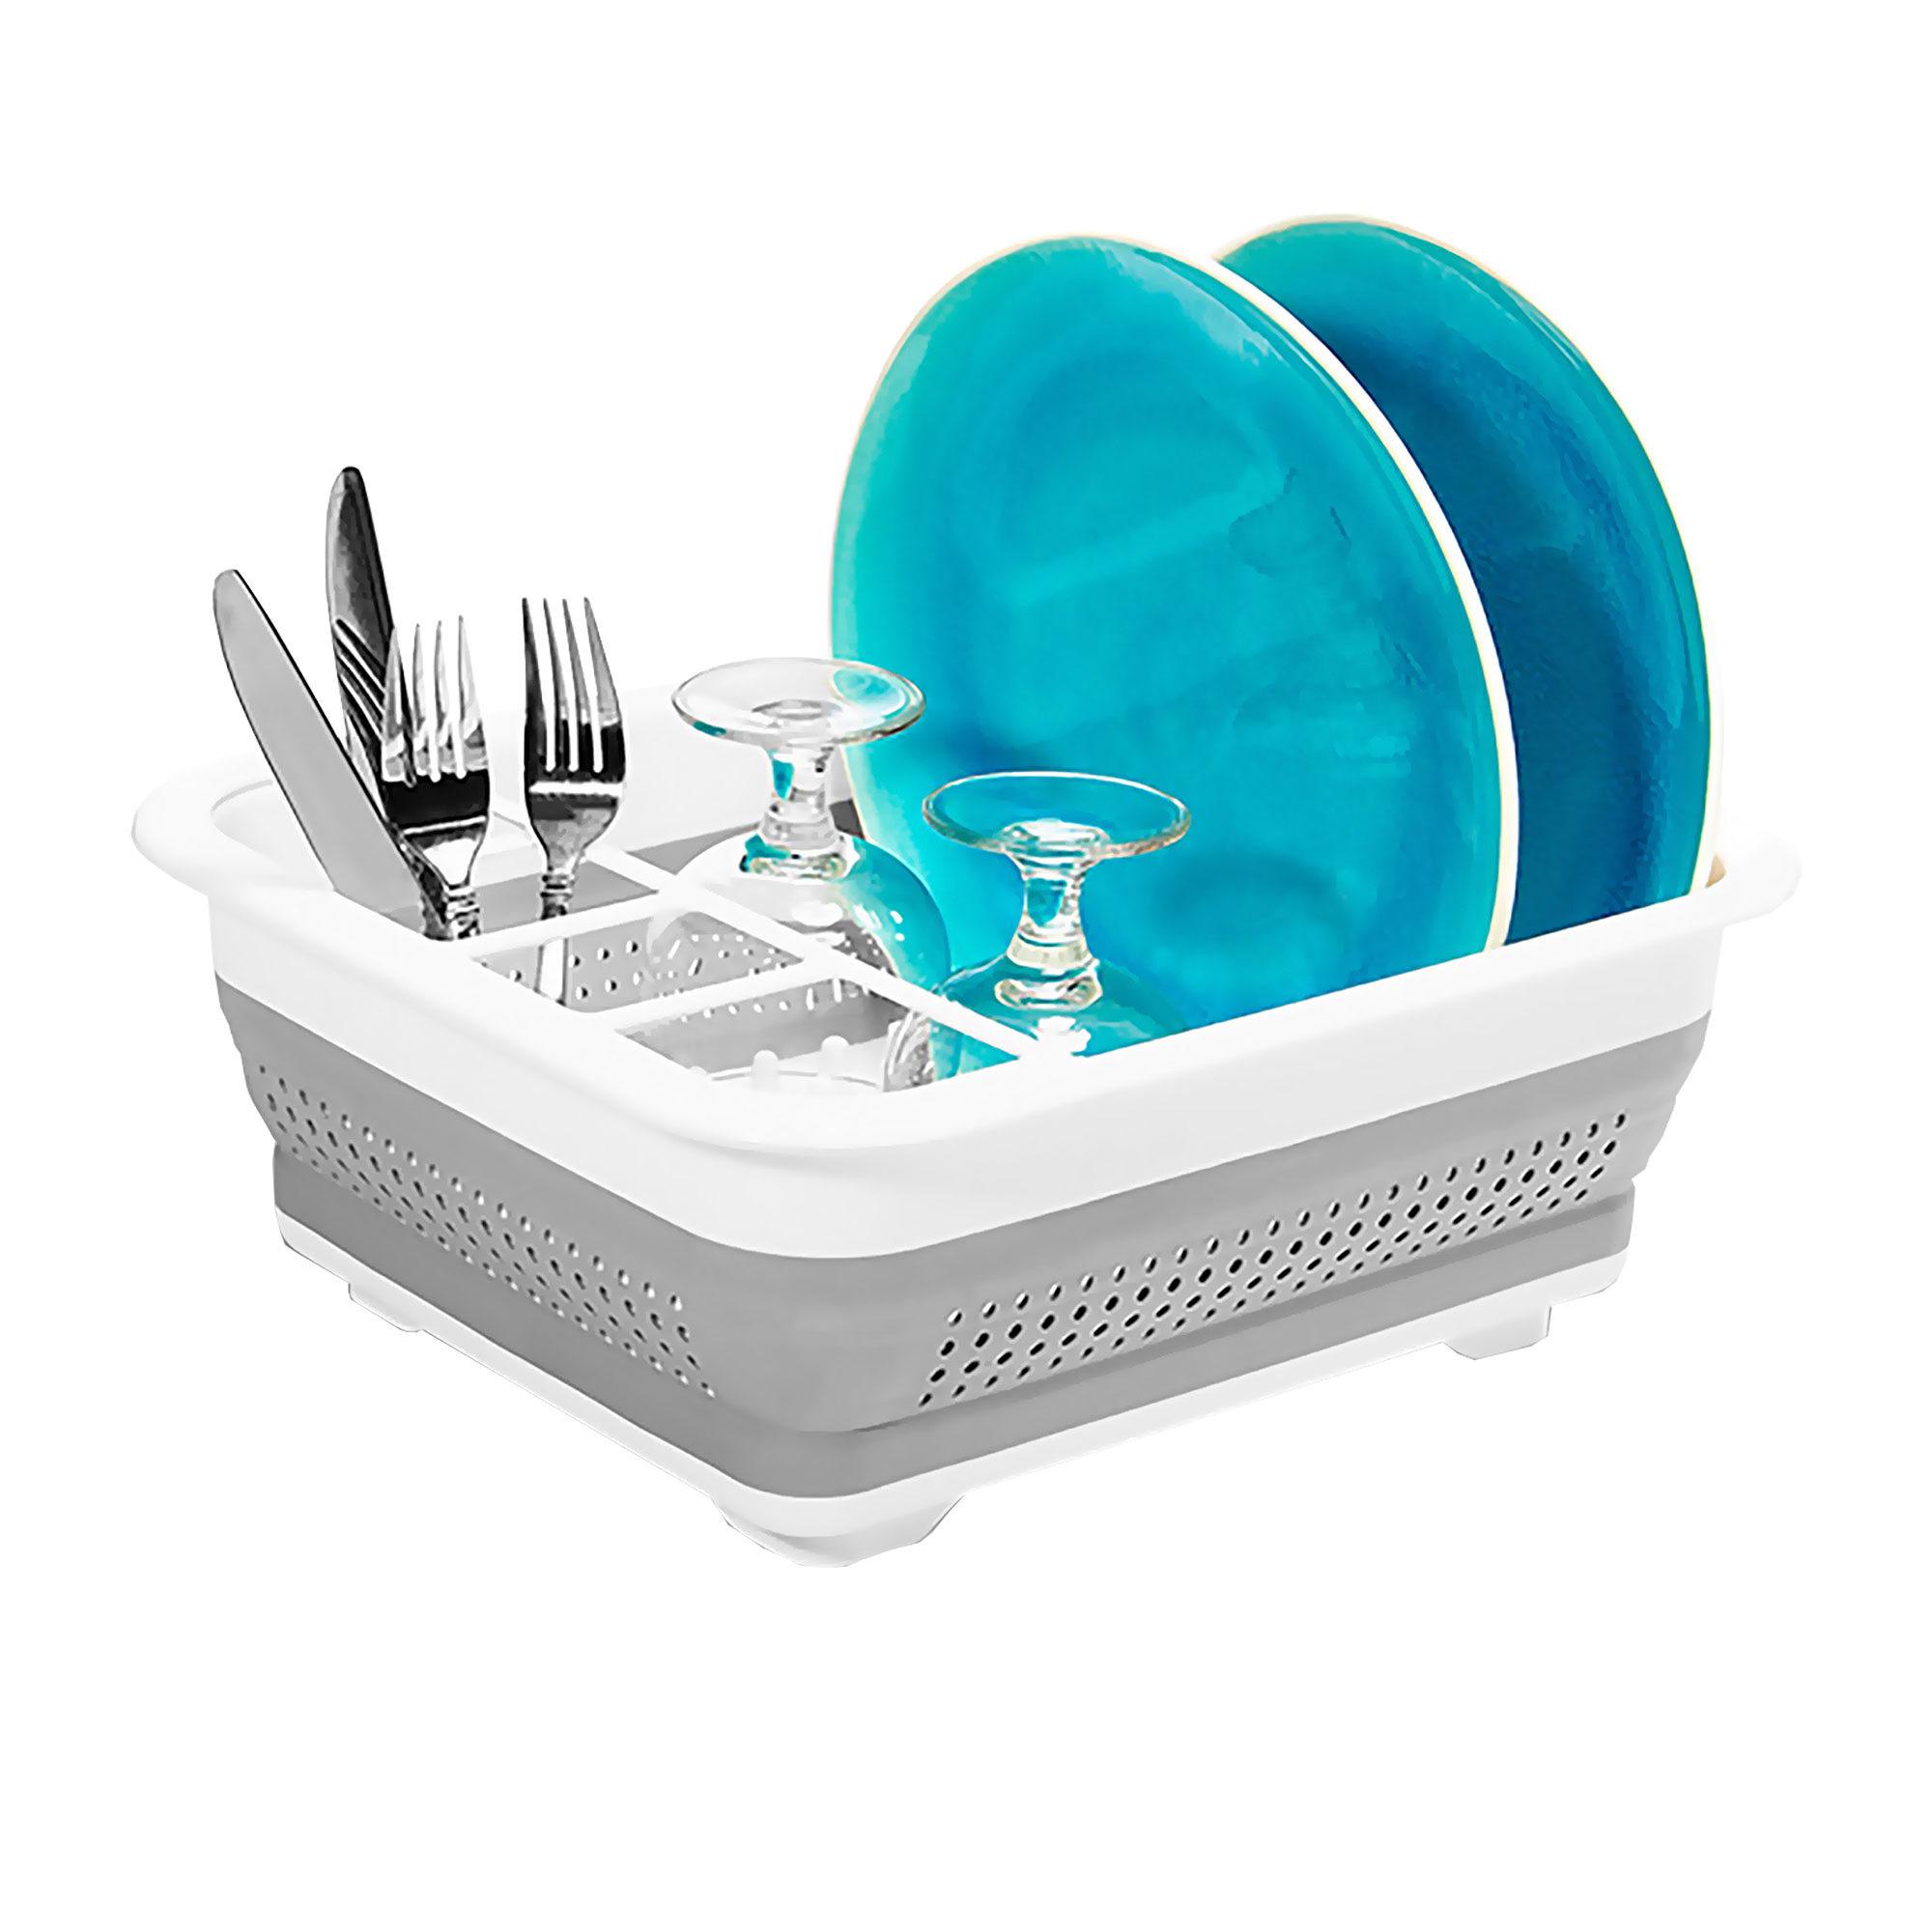 Madesmart Collapsible Dish Rack Small White Image 4